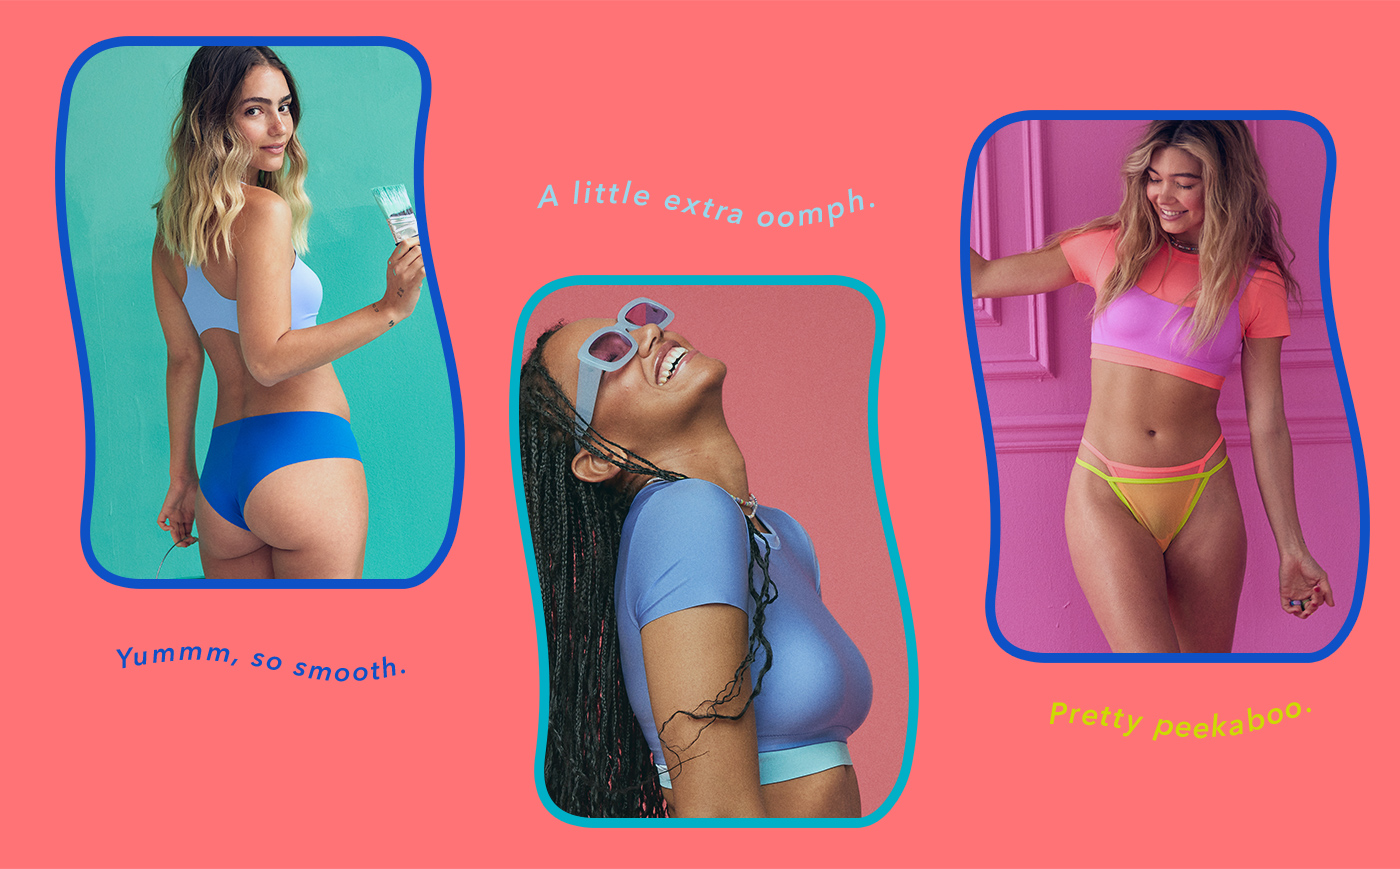 Introducing the SMOOTHEZ by Aerie™ Lookbook! - #AerieREAL Life